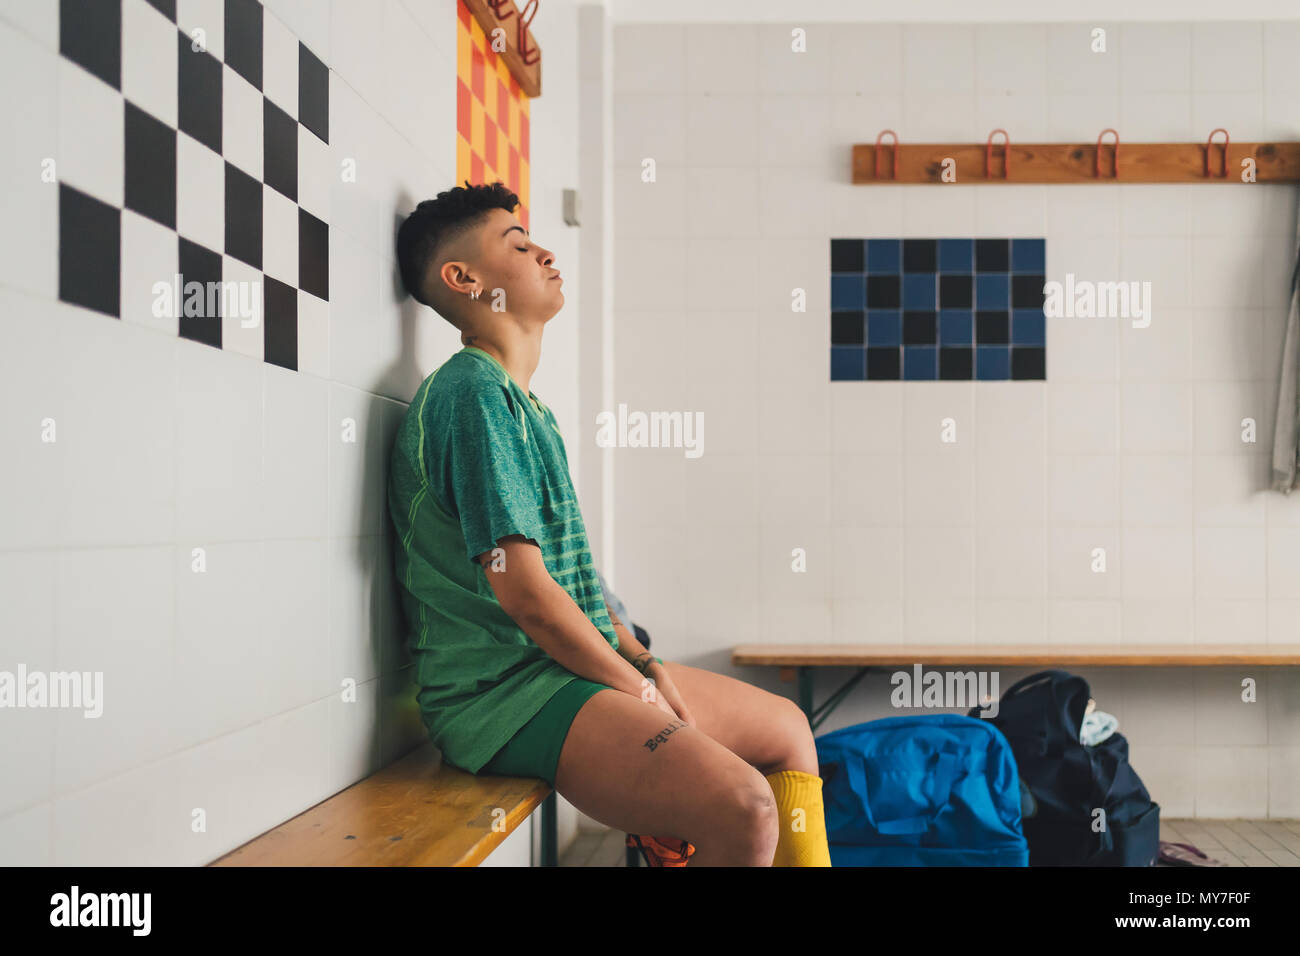 Football player on bench in changing room Stock Photo